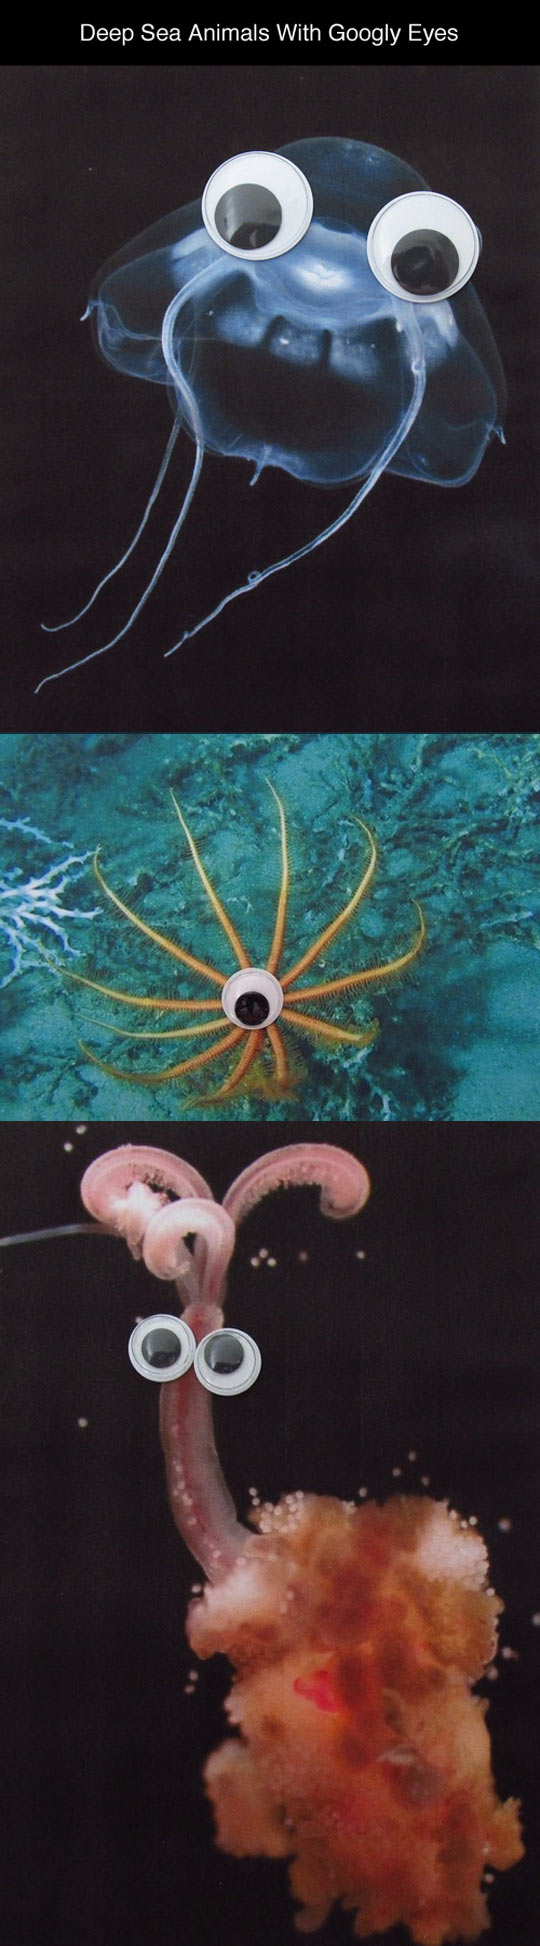 The Scariest Monsters Of The Deep Sea